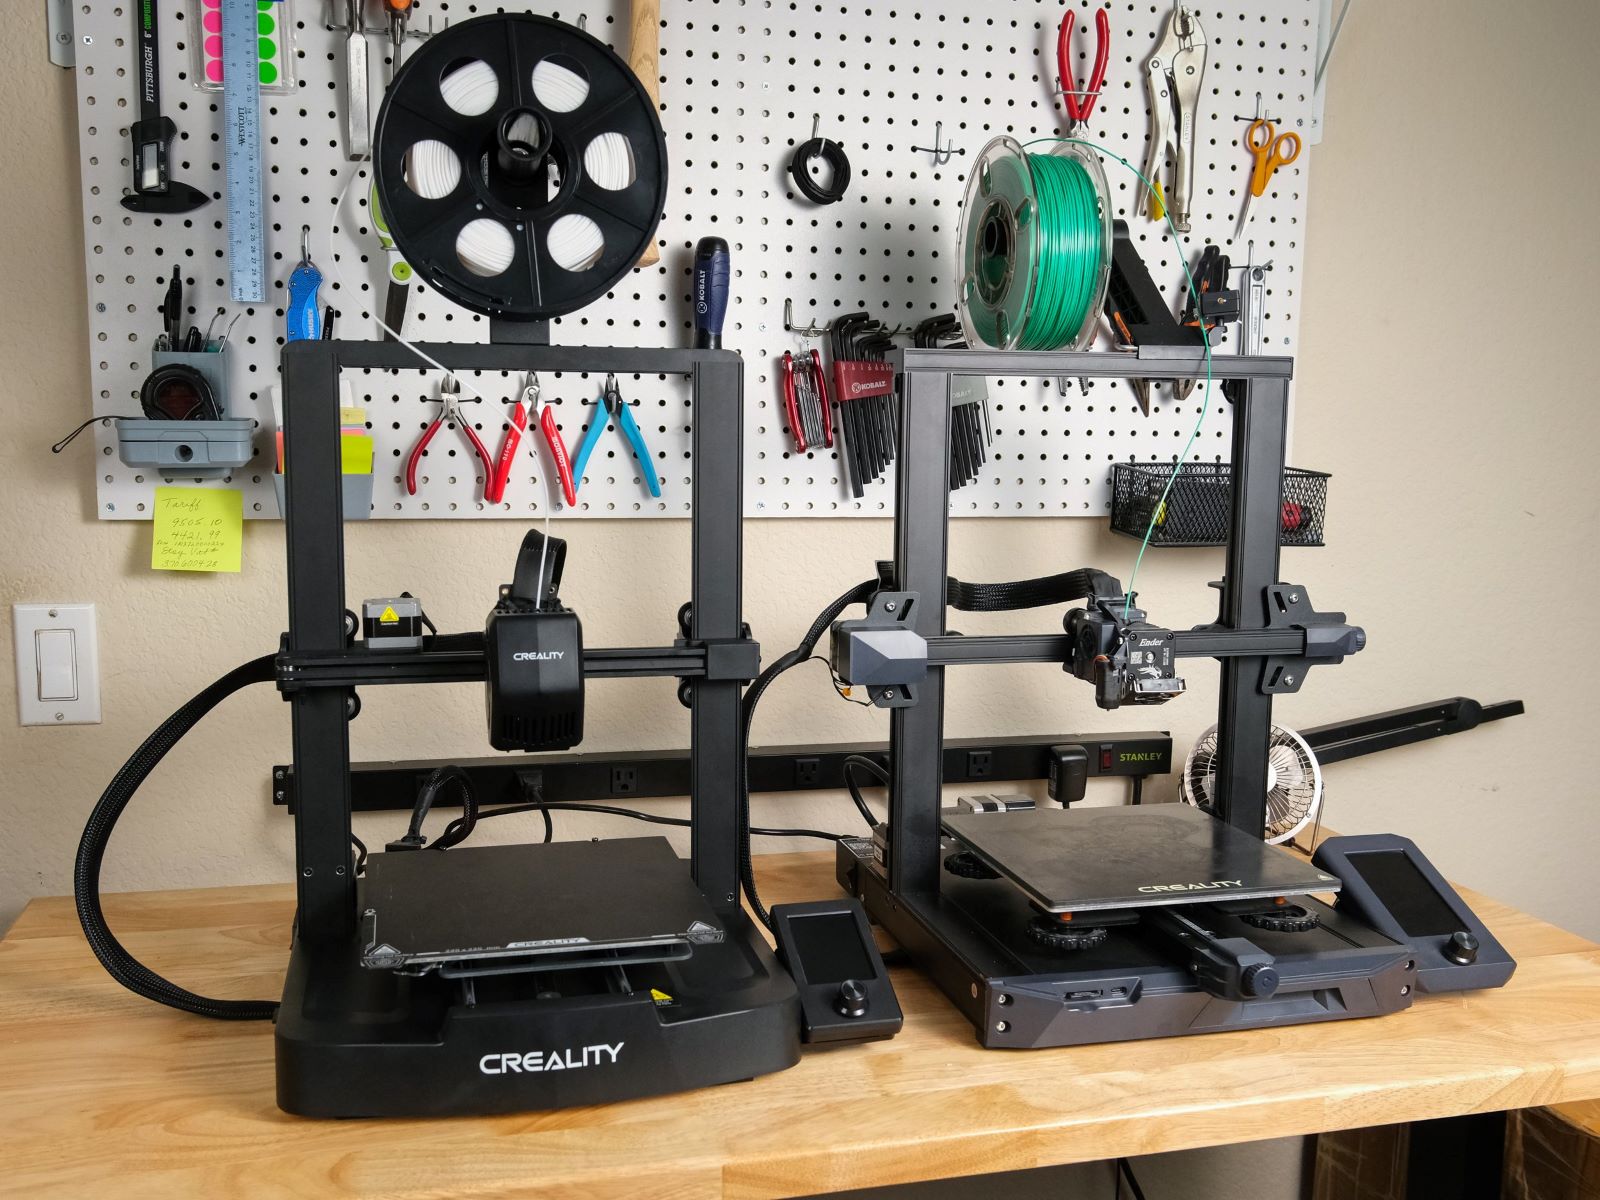 What Is The Best Creality 3D Printer